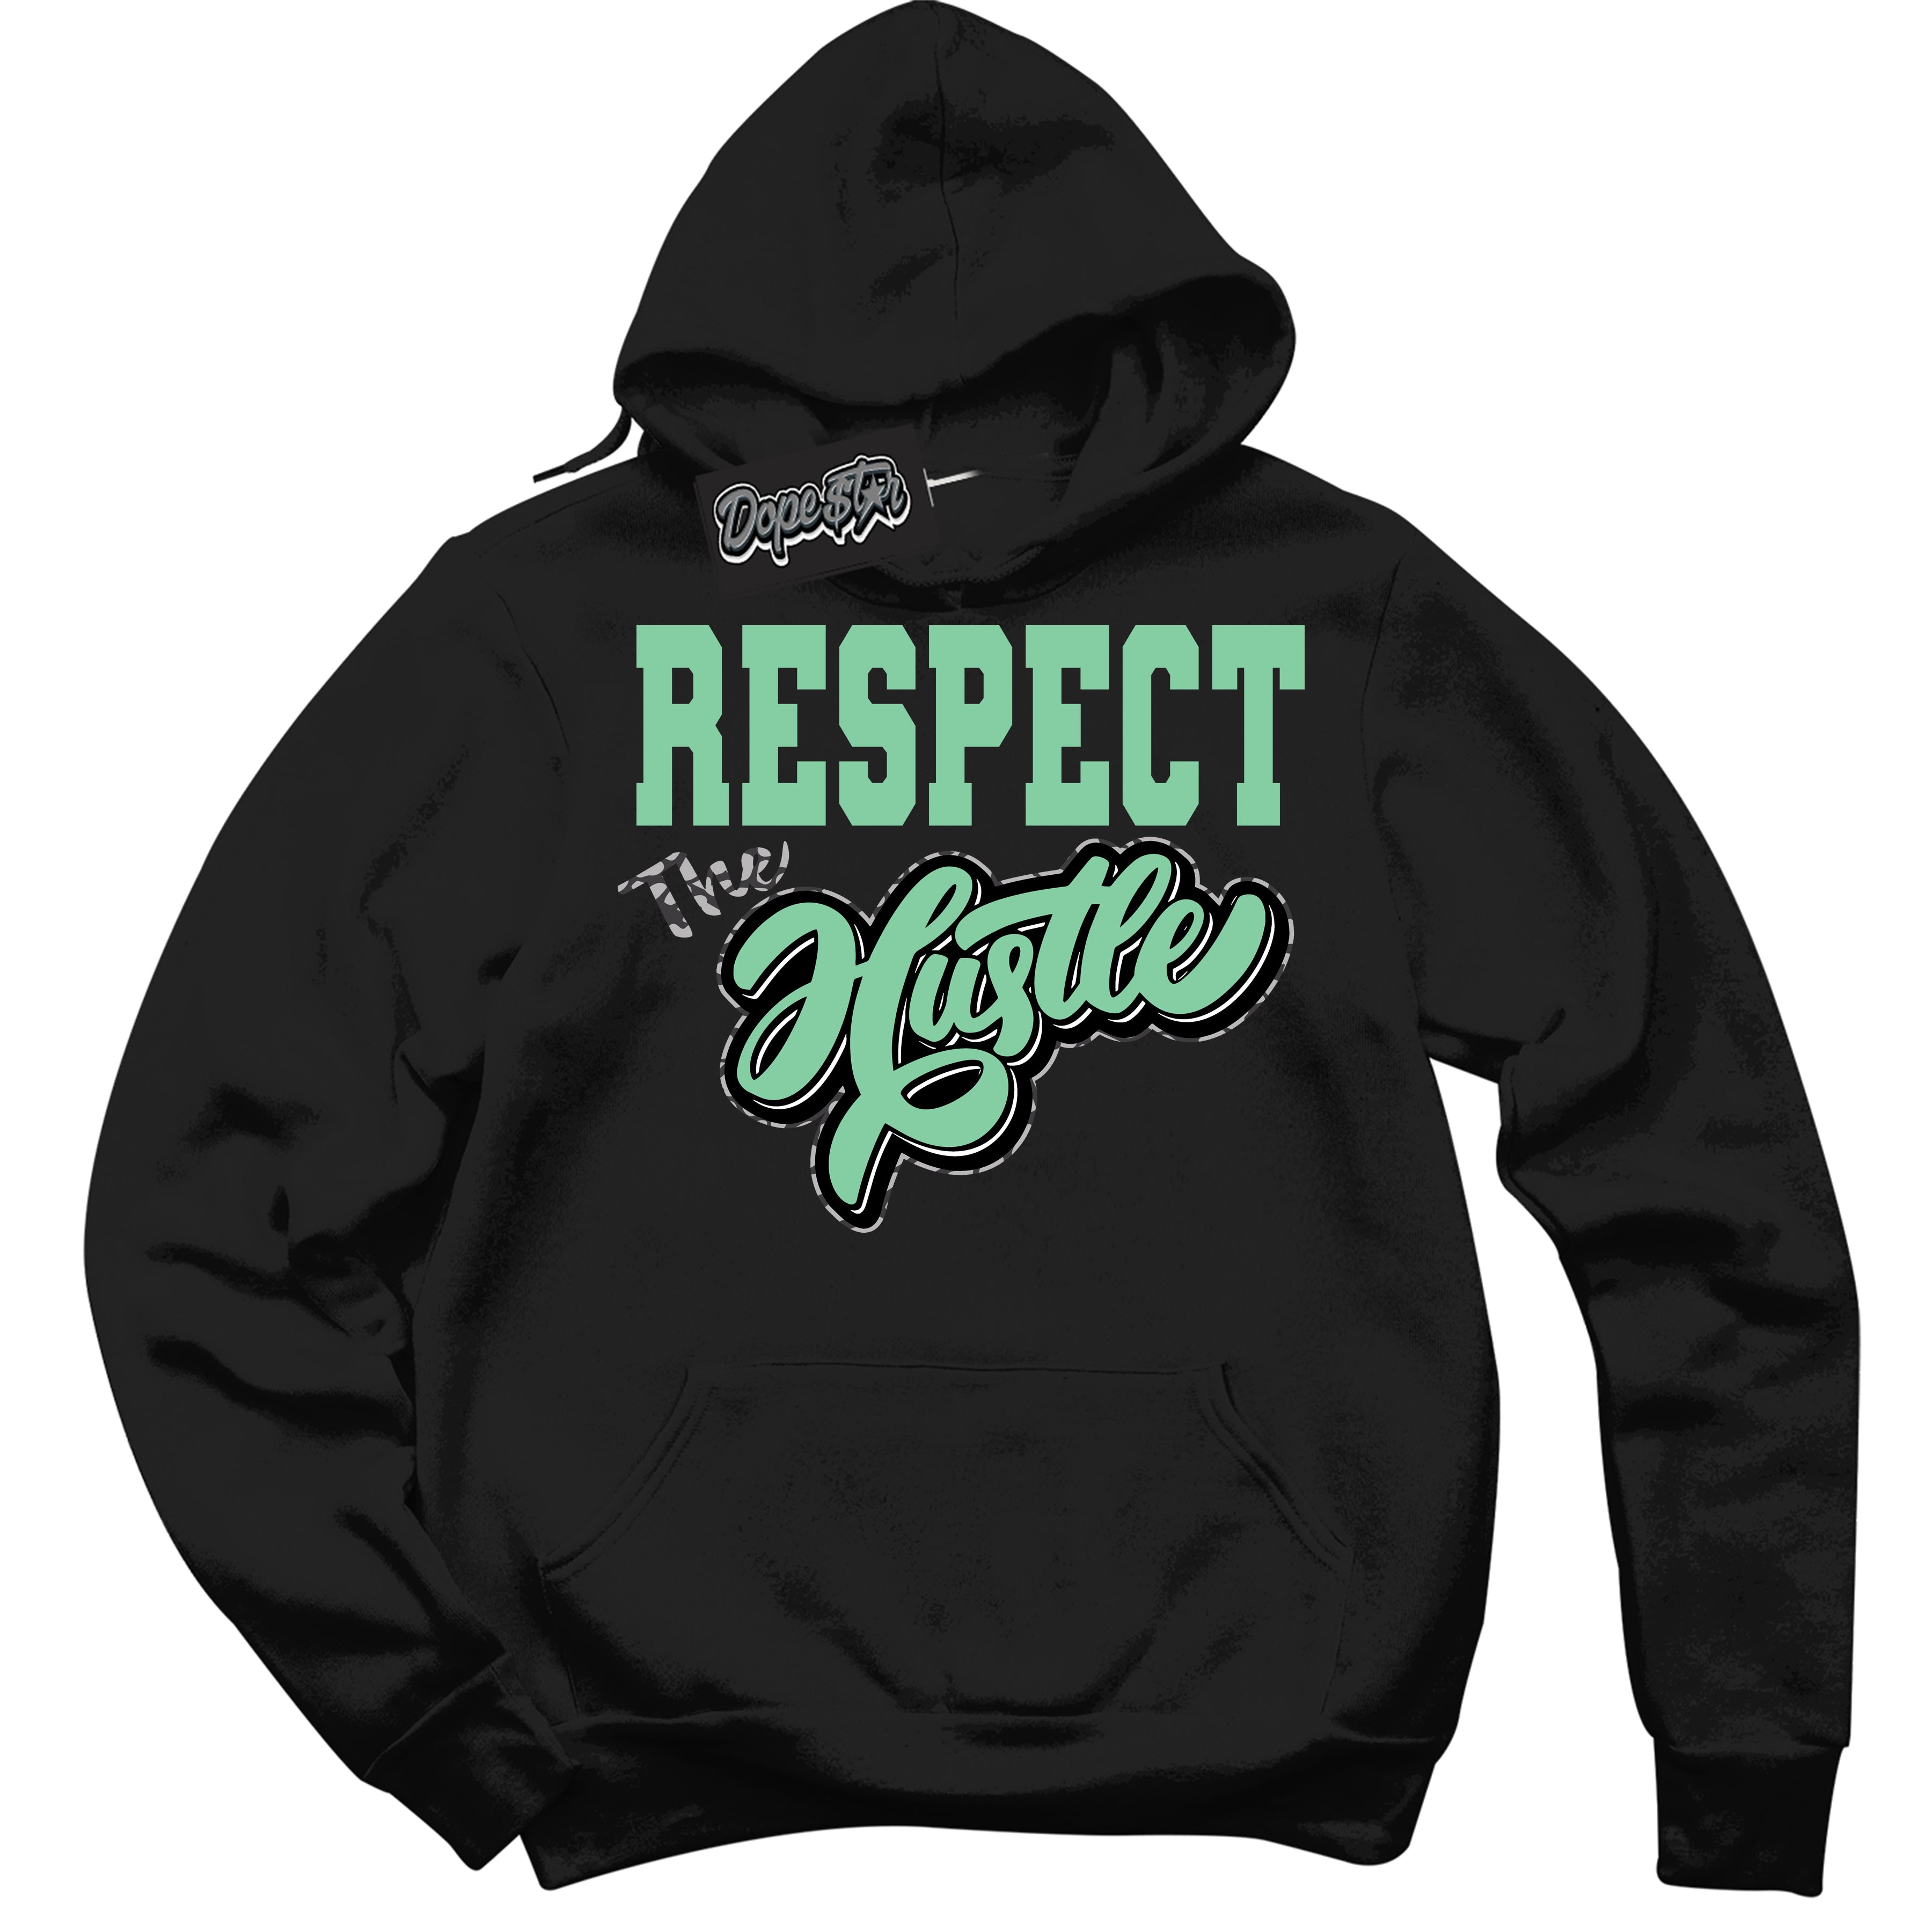 Cool Black Graphic DopeStar Hoodie with “ Respect The Hustle “ print, that perfectly matches Green Glow 3S sneakers